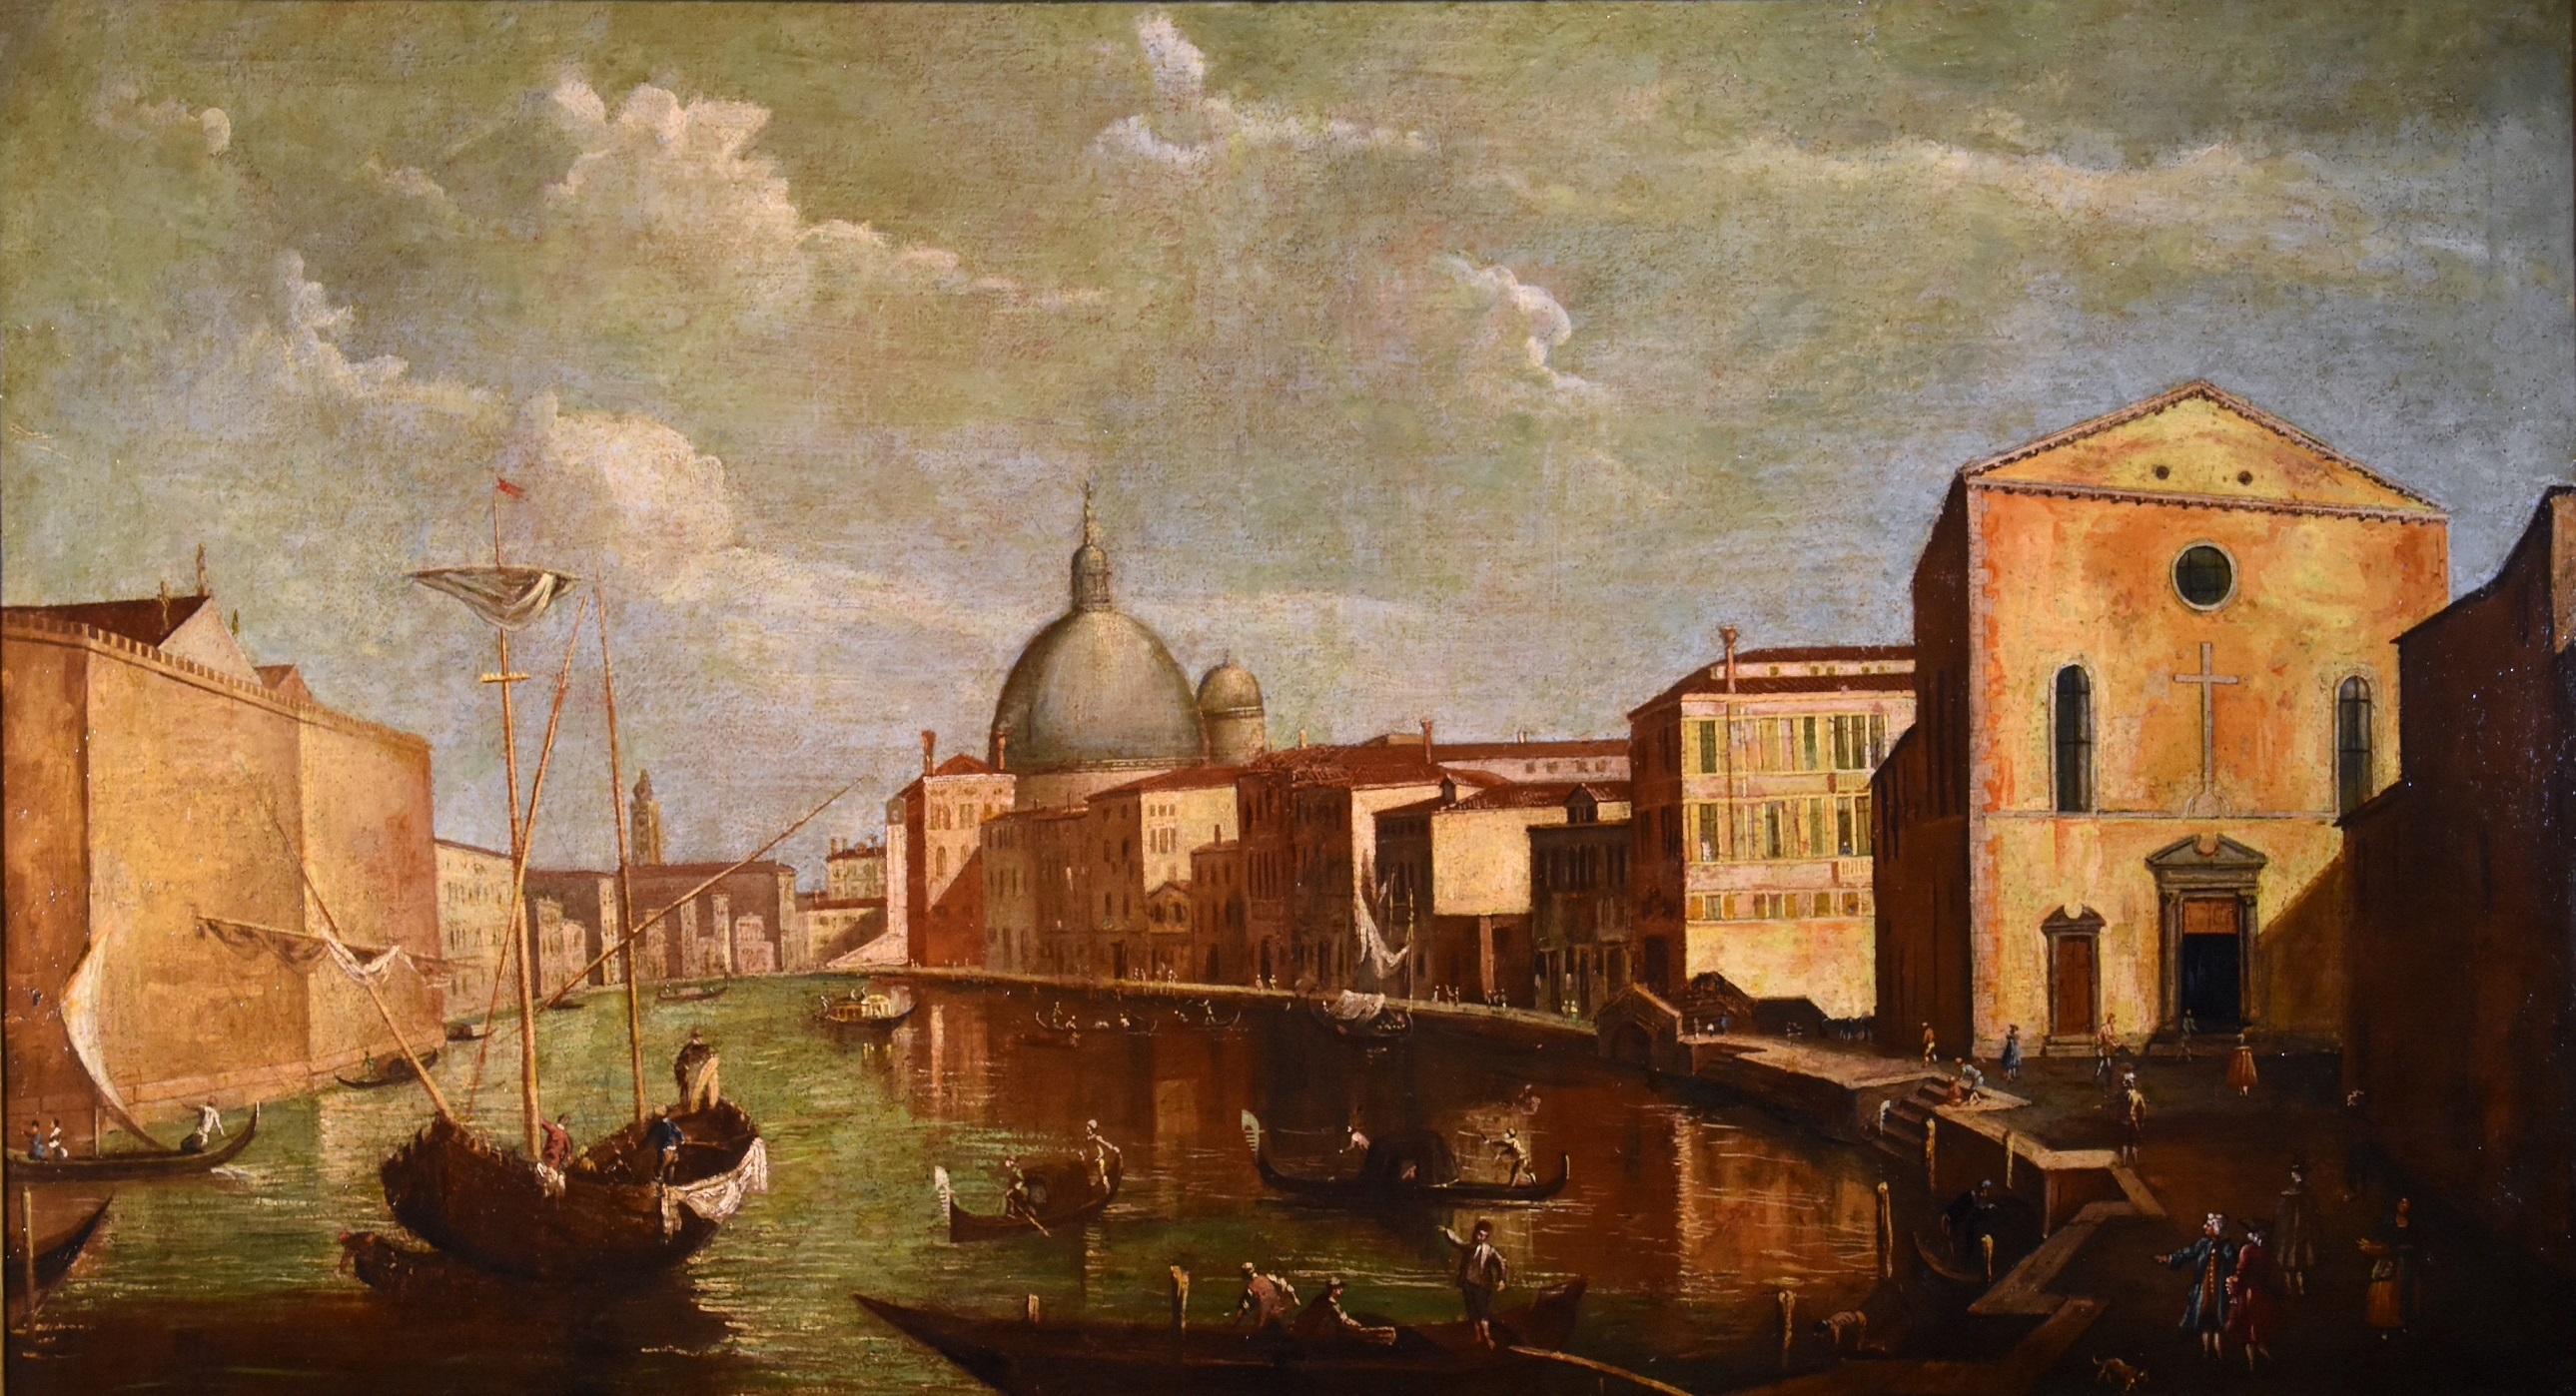 Venice Grand Canal Tironi Paint Oil on canvas Old master 18th Century Italy Art - Painting by Francesco Tironi (Venice, ca. 1745 - 1797)